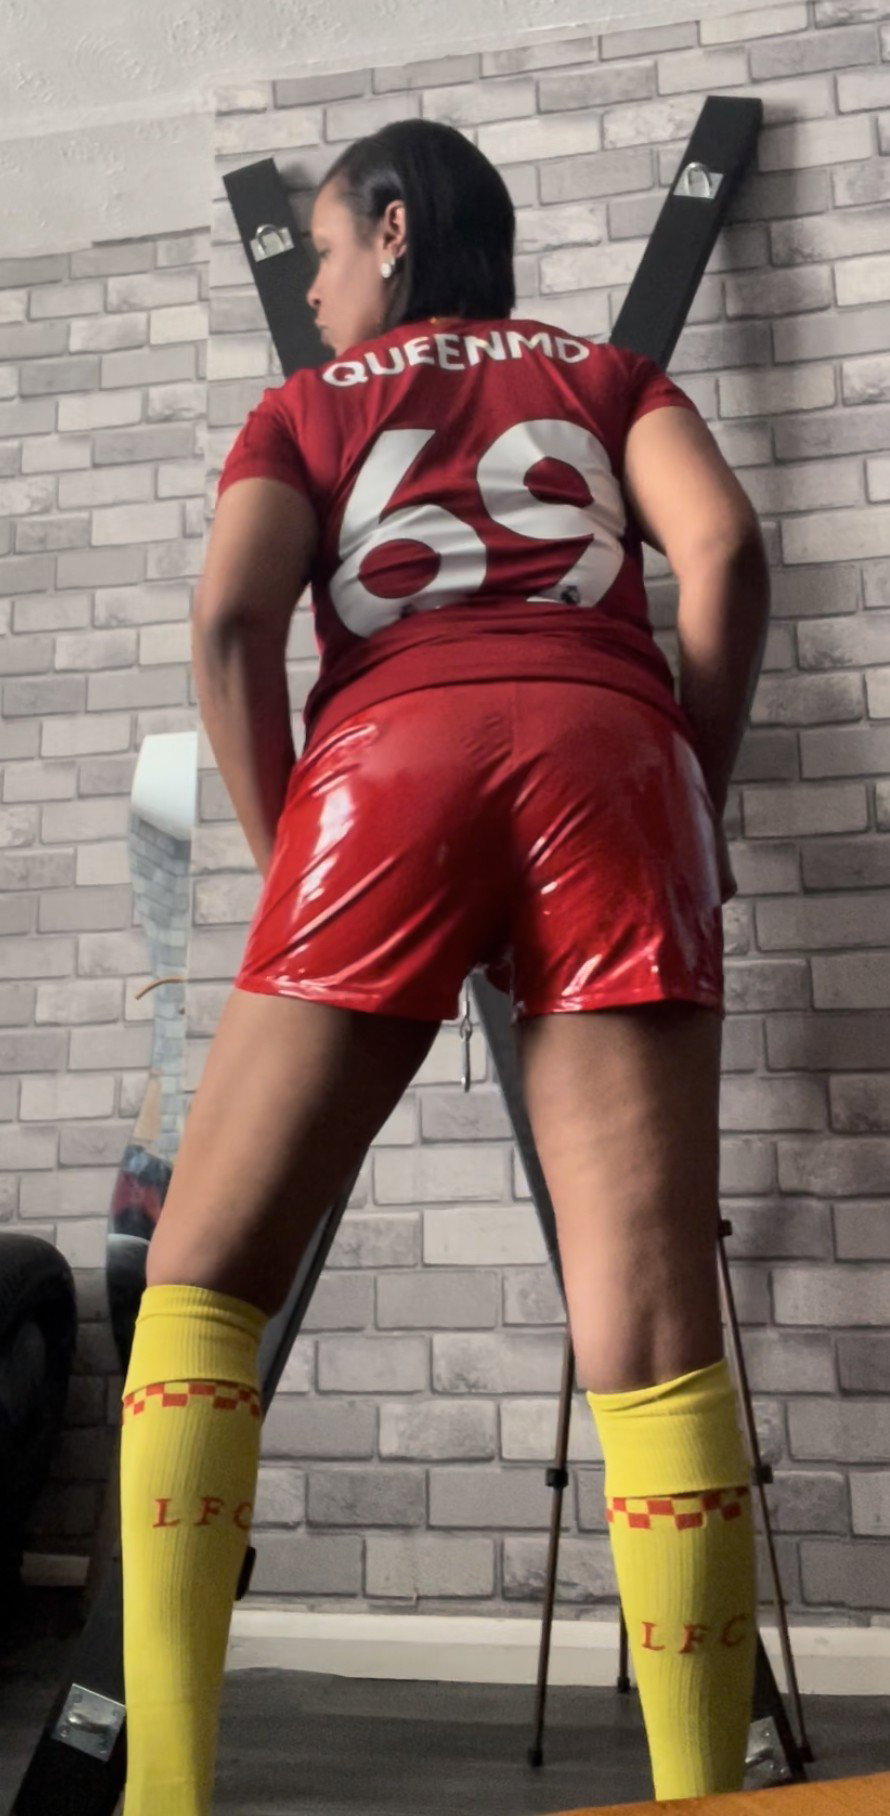 Watch the Photo by MistressMD with the username @MistressMD, who is a star user, posted on May 19, 2022 and the text says 'As I was unable to celebrate my boys FA cup win at the weekend (coz I was on duty😇) 

I celebrated in my own way…
❤️‍🔥 #LFC ❤️‍🔥 

With some sharp face slaps using this selection of gloves & I couldn’t resist making him bring that Chelsea top.....'